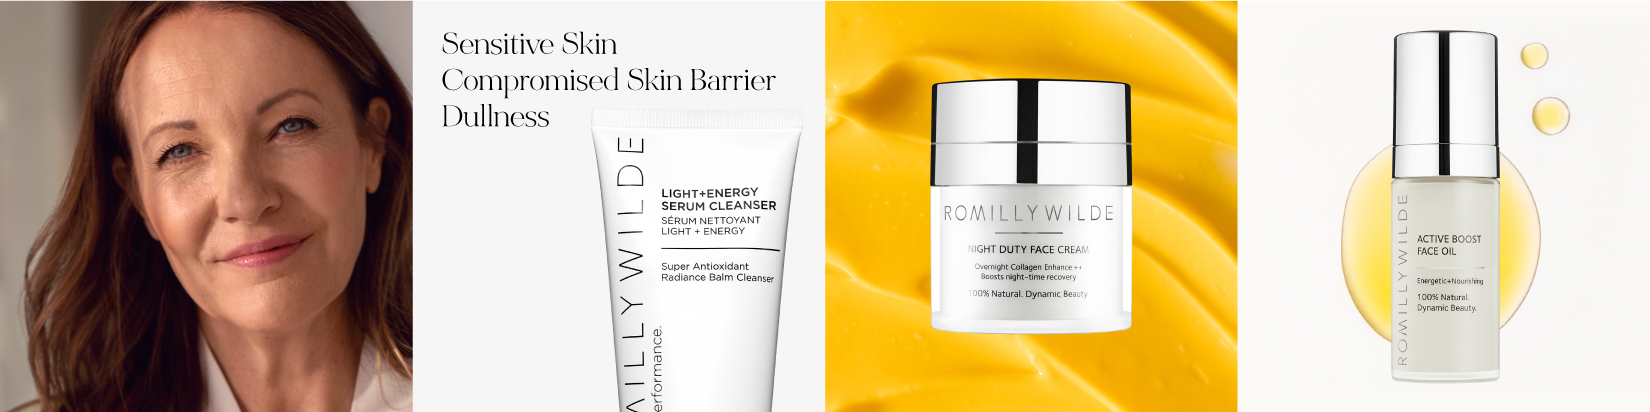 Sensitive Skin, Compromised Skin Barrier and Dullness Imagery